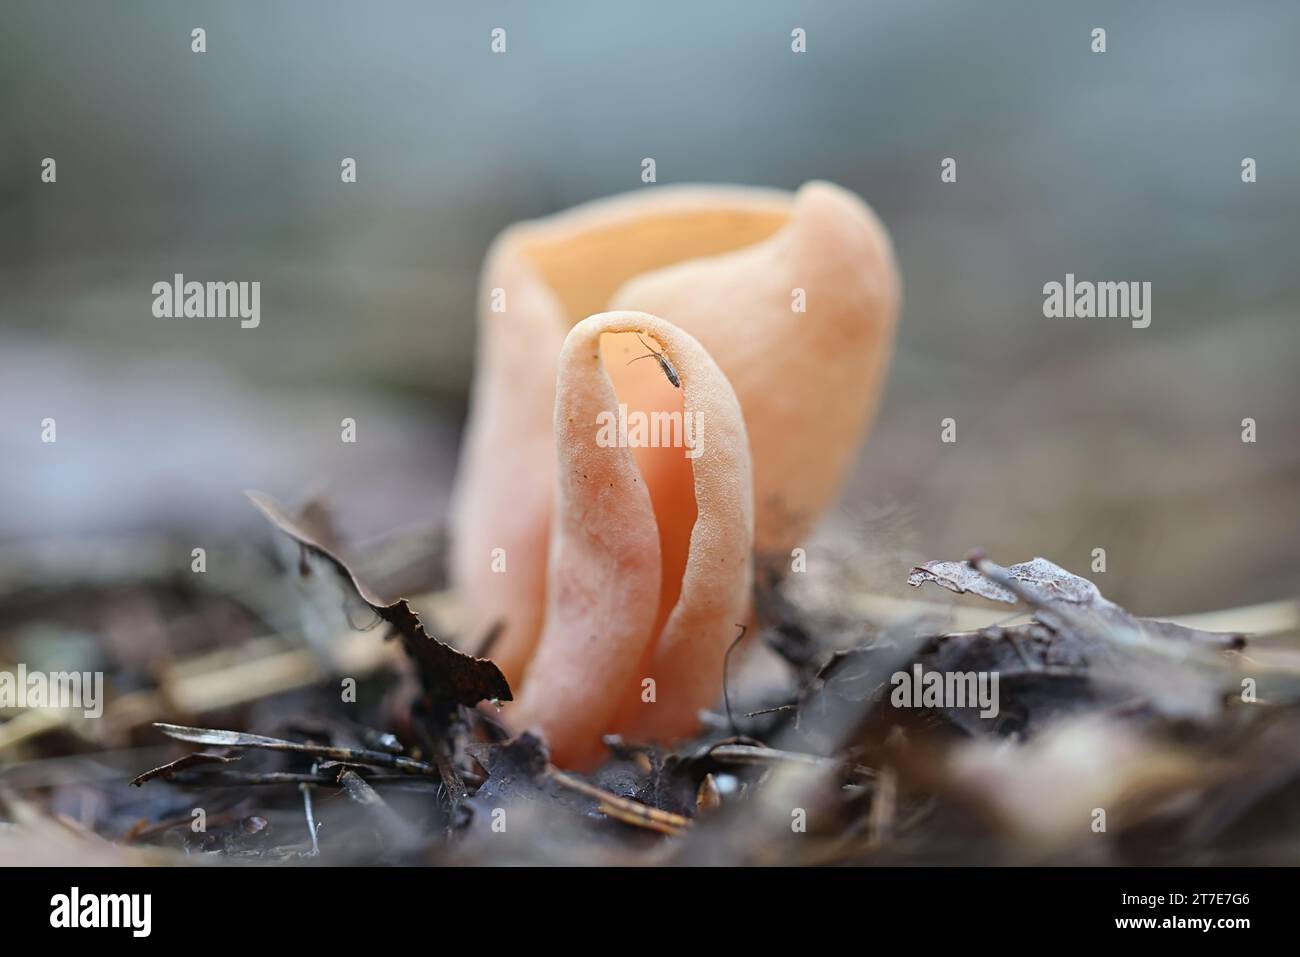 Otidea onotica, commonly known as hare's ear, wild fungus from Finland Stock Photo